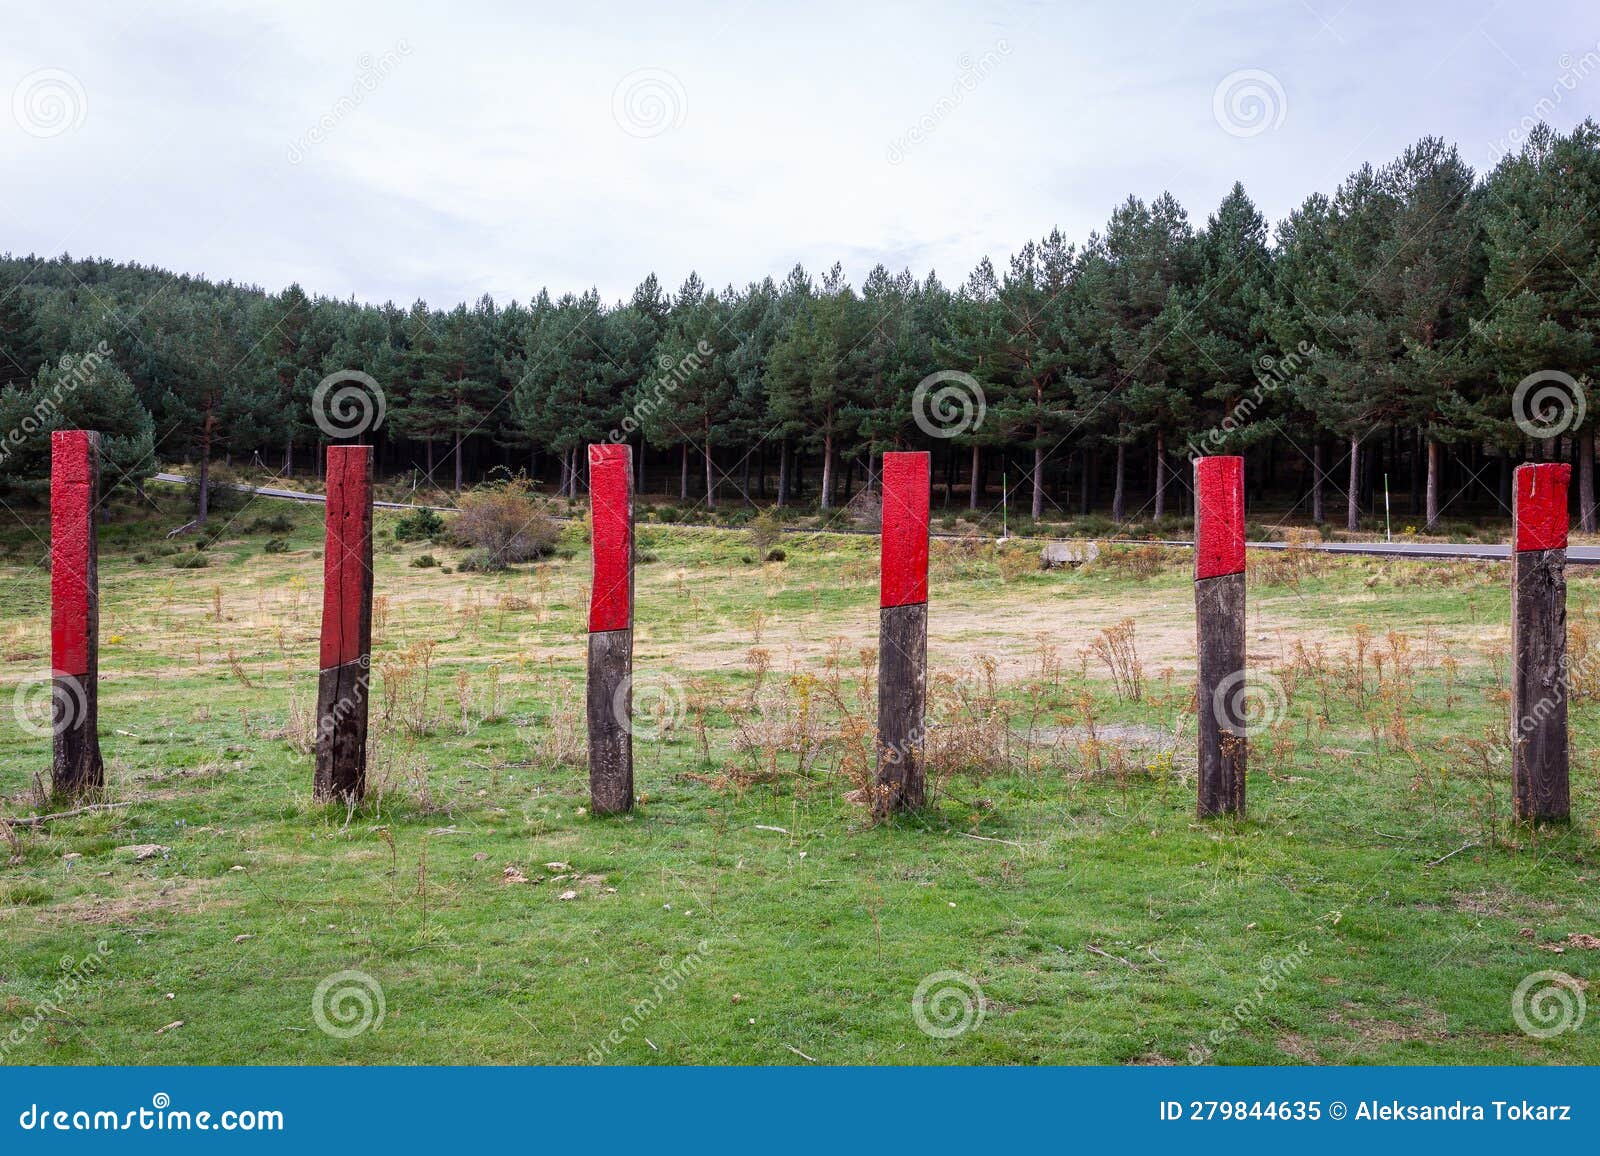 wooden fence piles with red markings against cattle, spain.